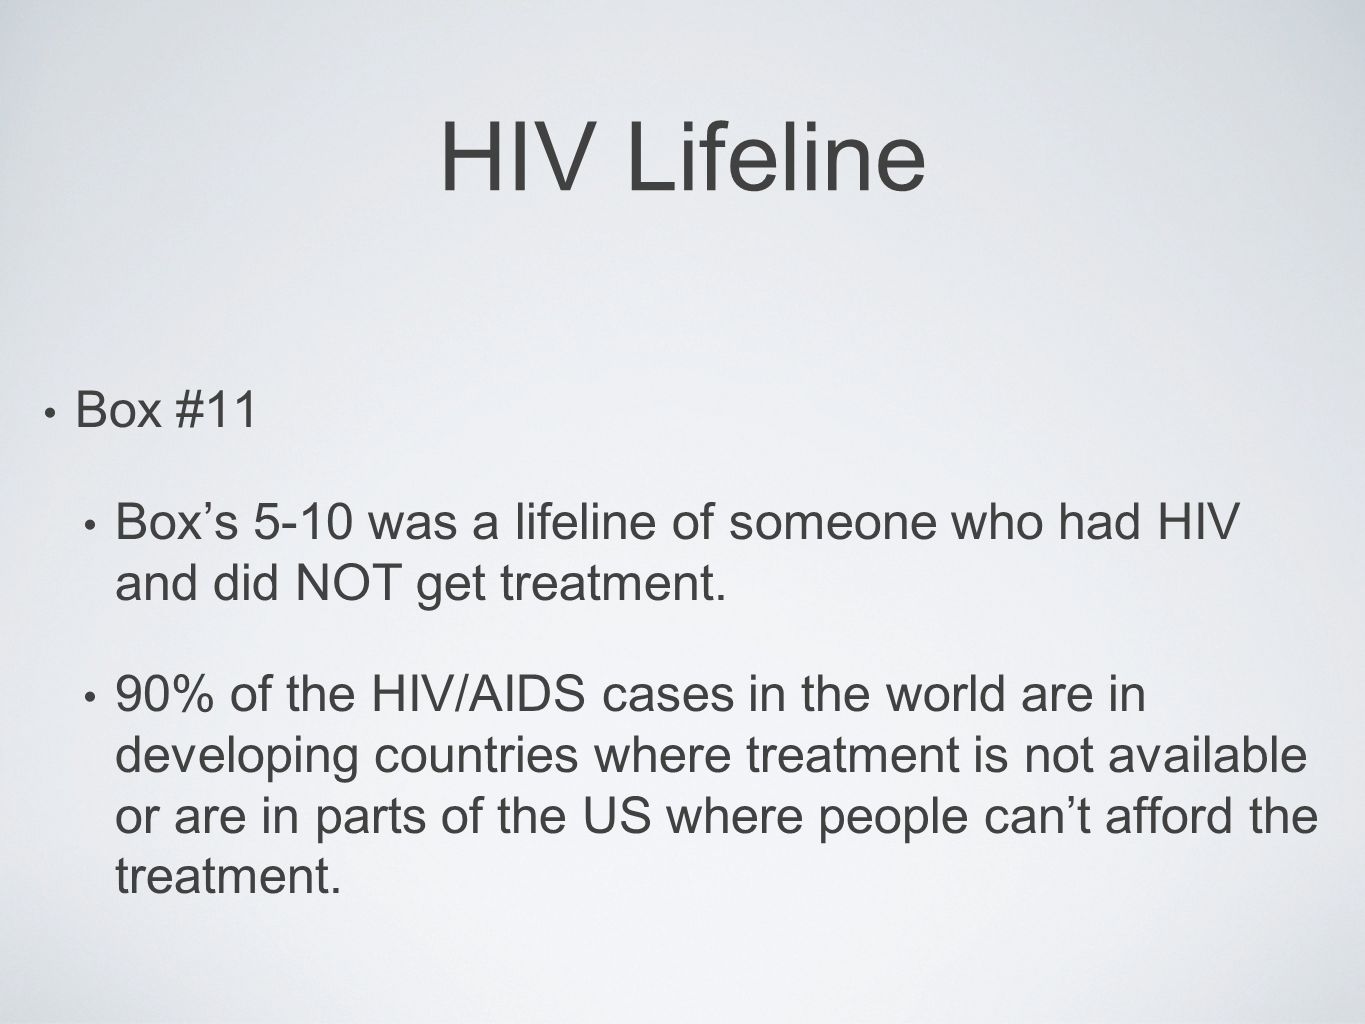 HIV Lifeline Box #11. Box’s 5-10 was a lifeline of someone who had HIV and did NOT get treatment.